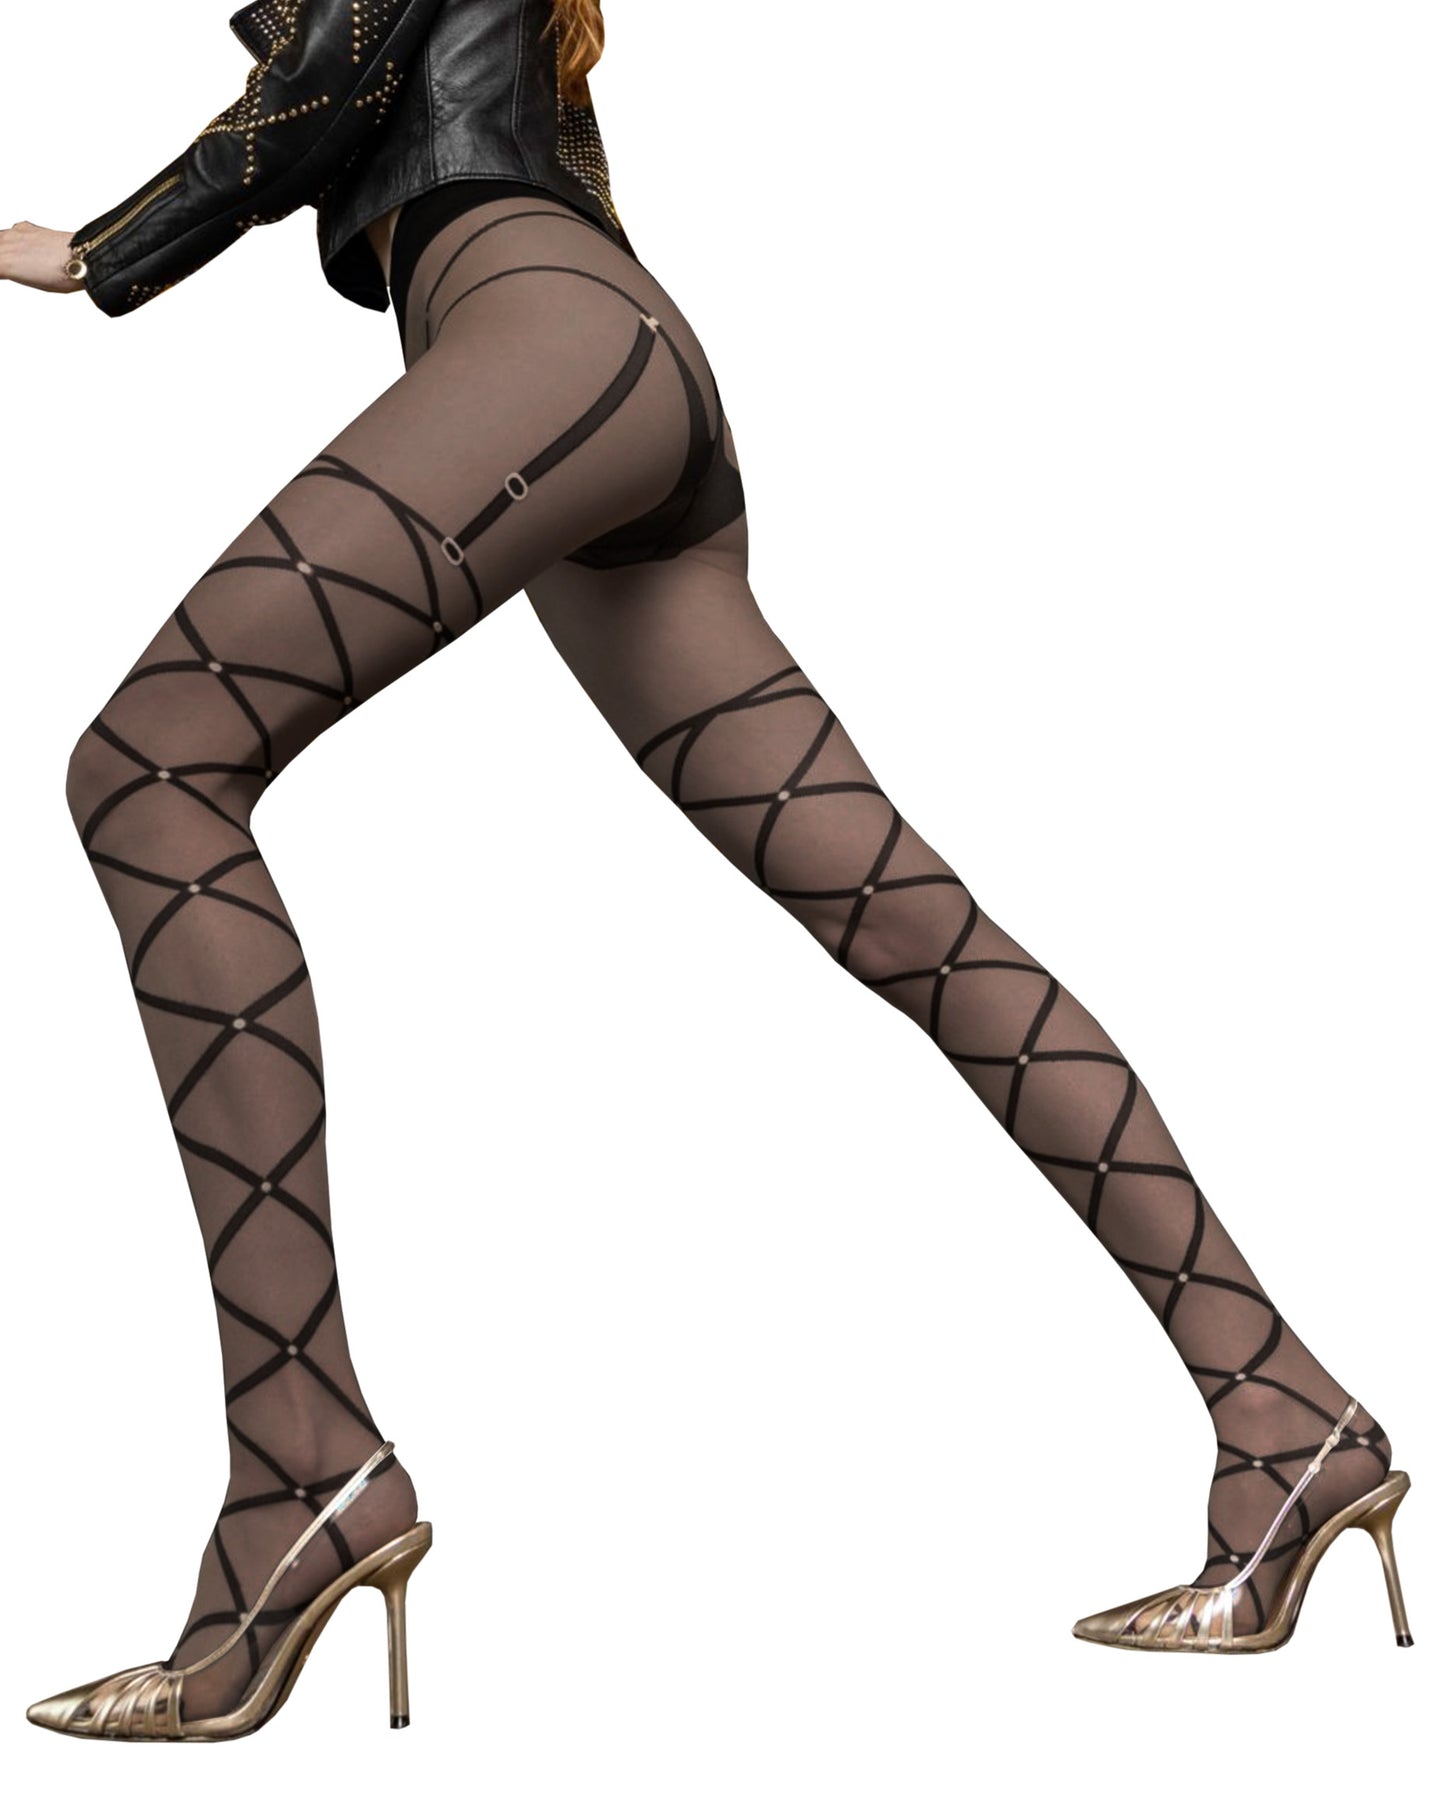 Trasparenze Toronto Collant - Sheer black fashion tights with a black linear diamond pattern that look like leg wraps with faux suspender straps and brief with light grey details.